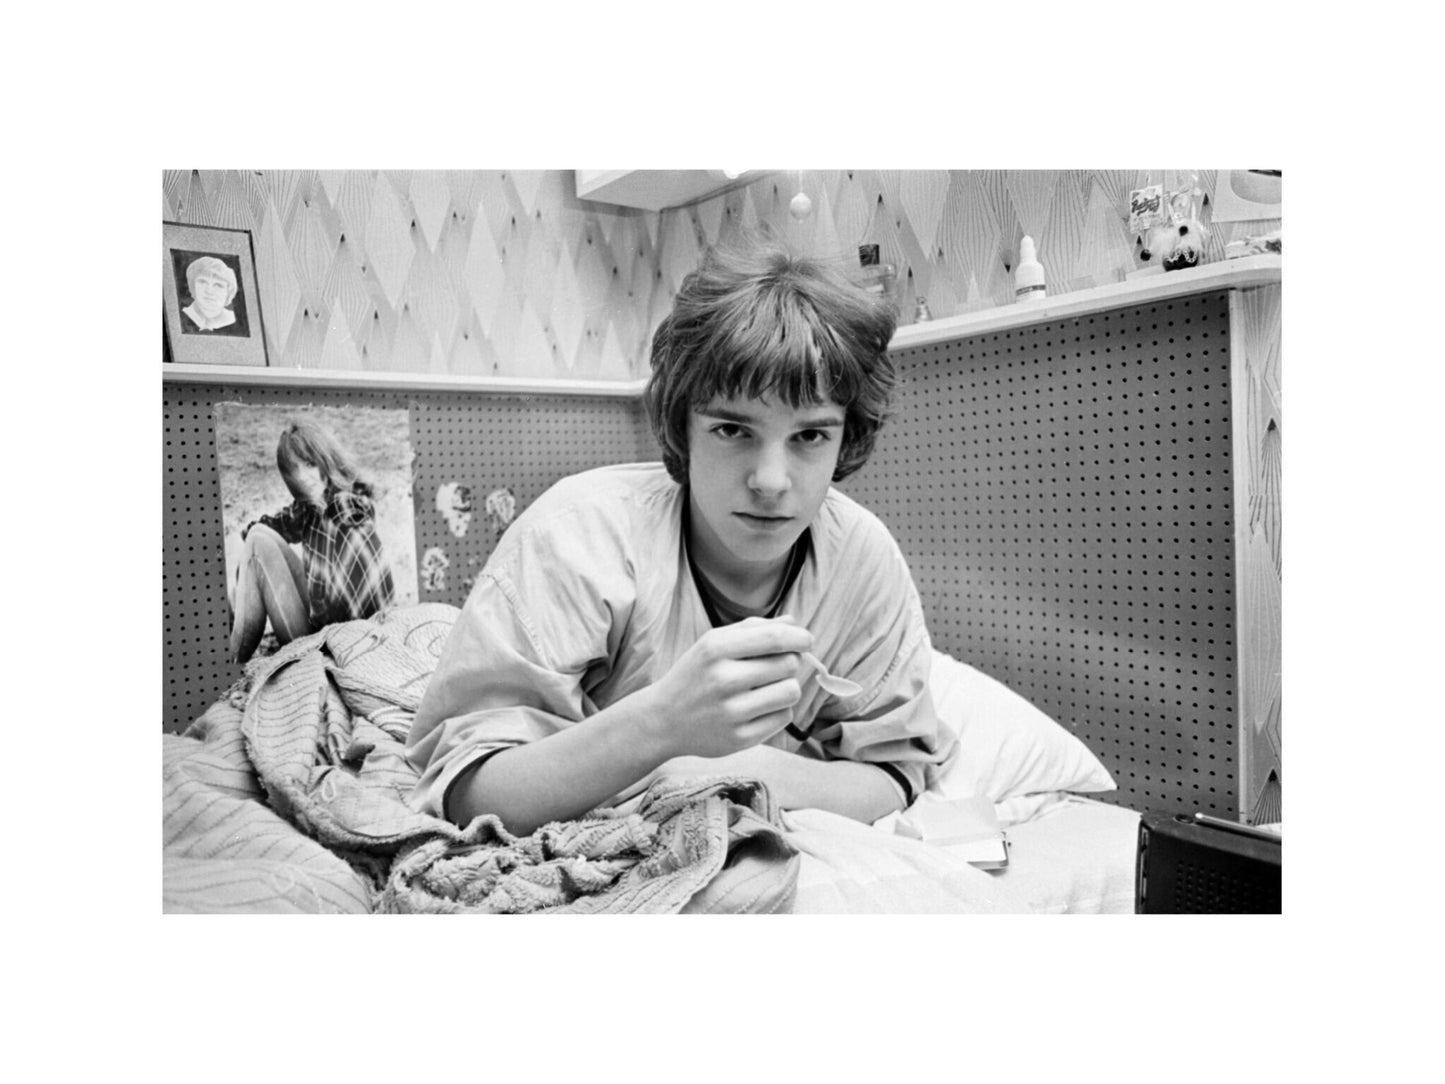 Peter Frampton - In Bed with the Flu, England, 1968 Print